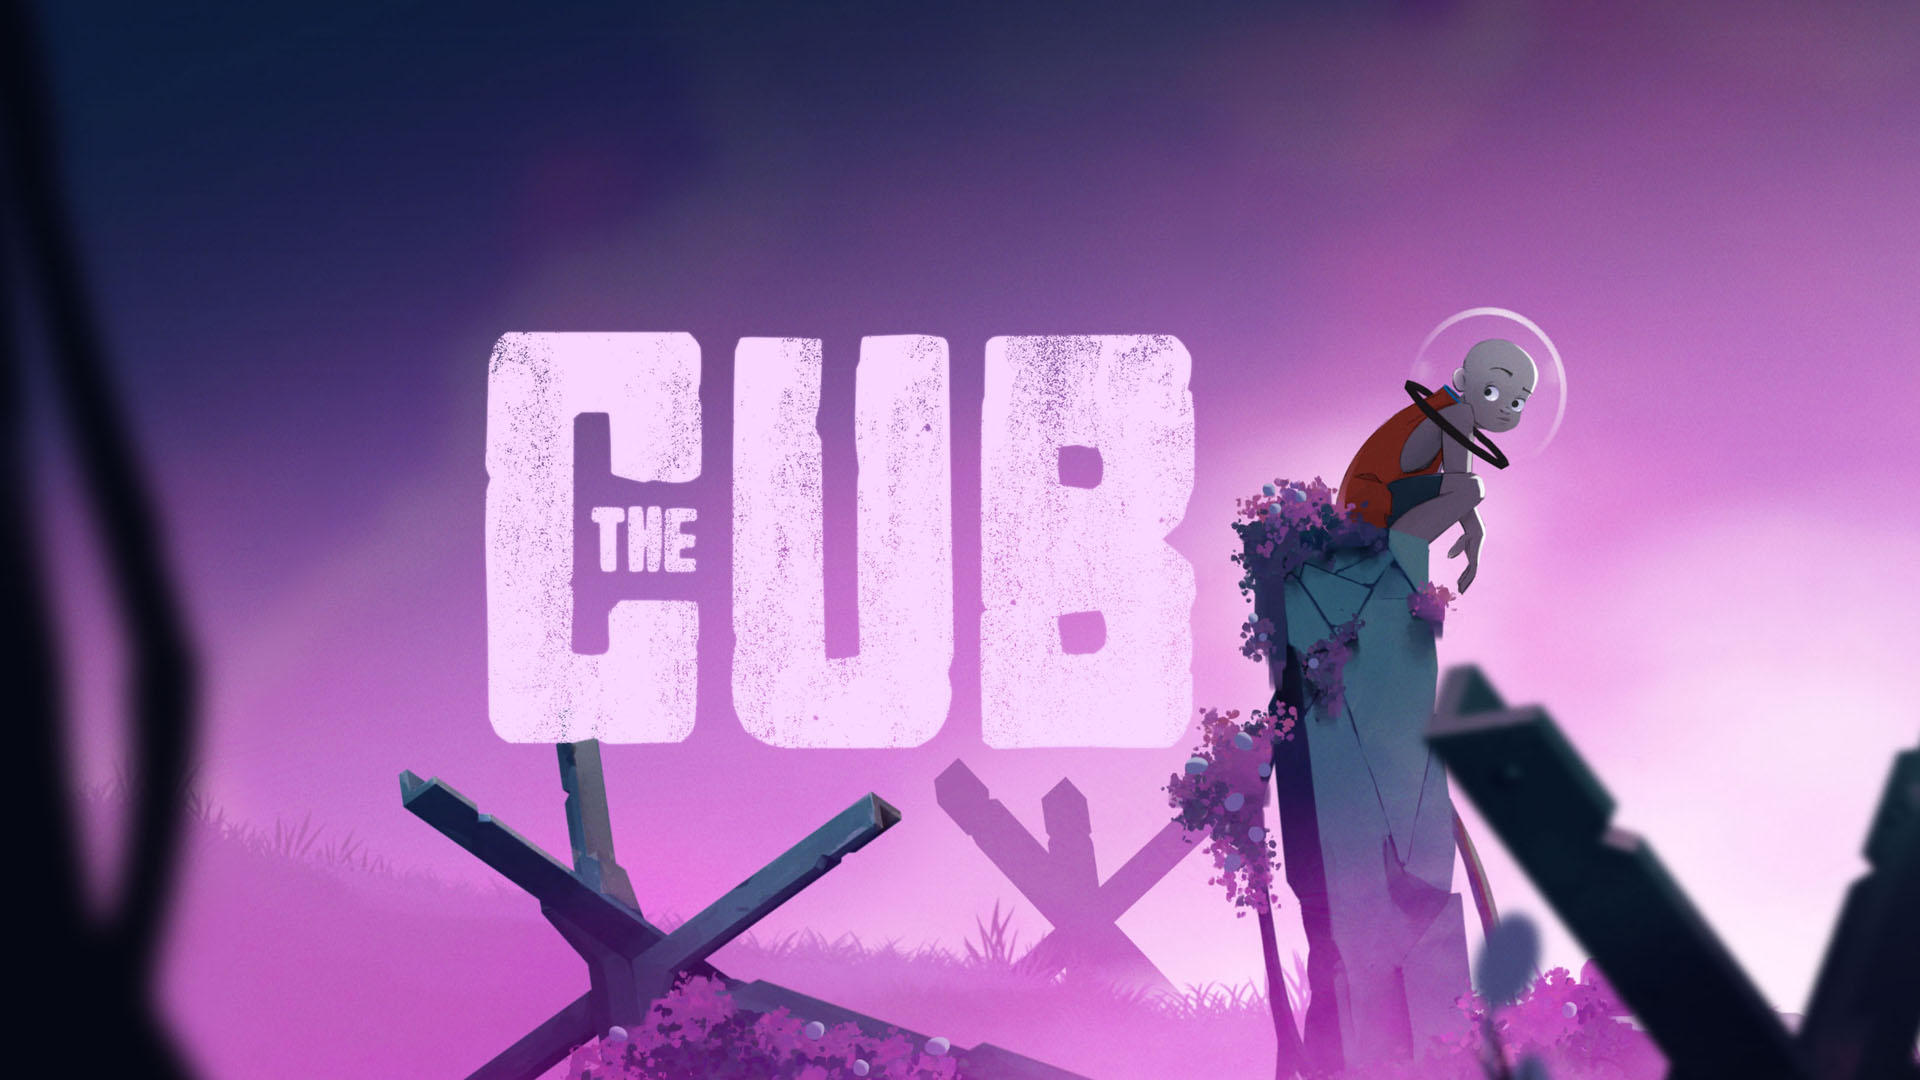 The Cub Enters the Discontinue of The World